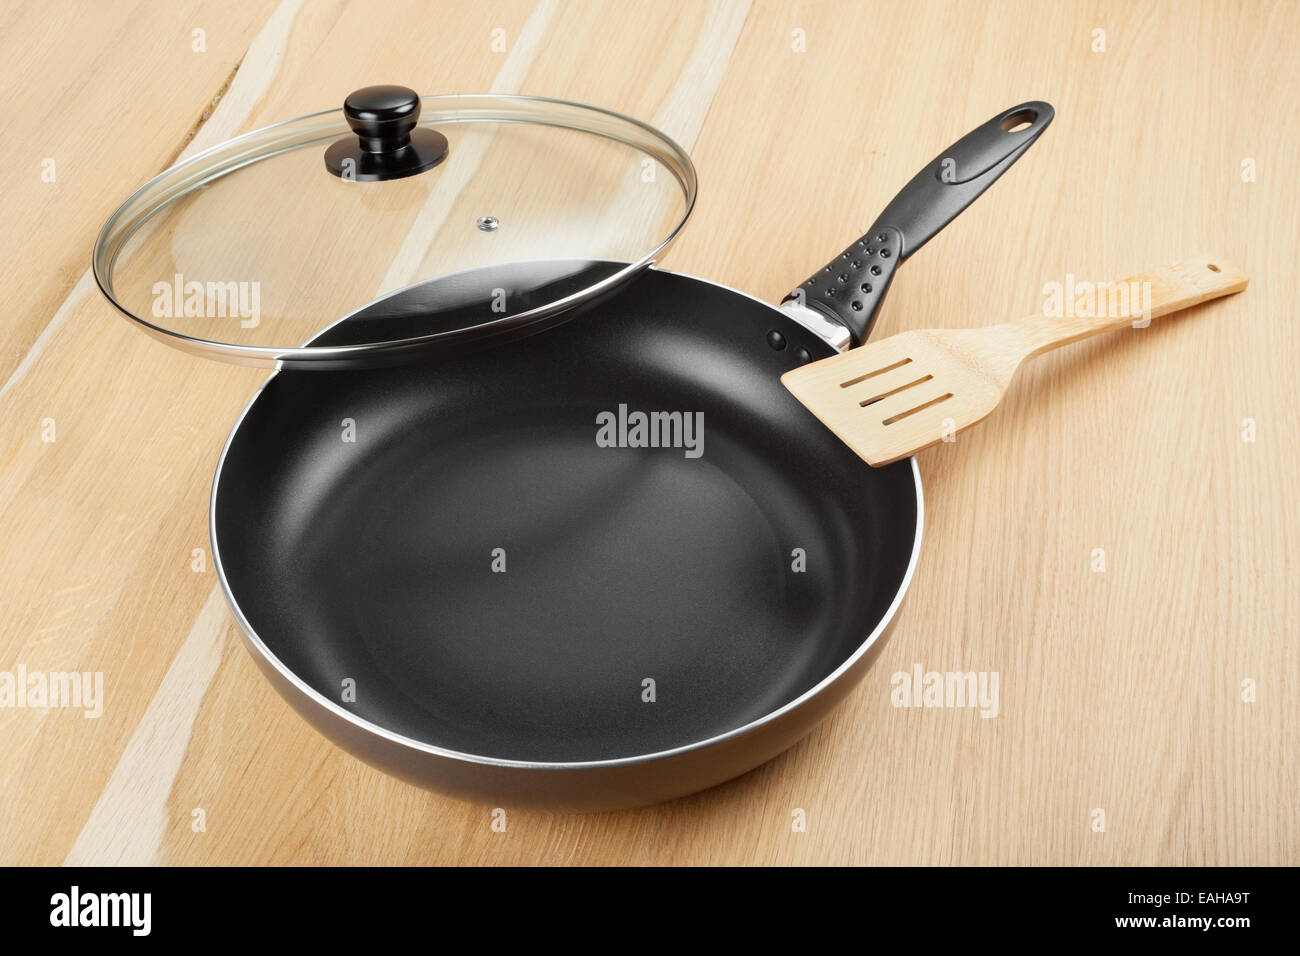 frying pan with lid on wooden table Stock Photo